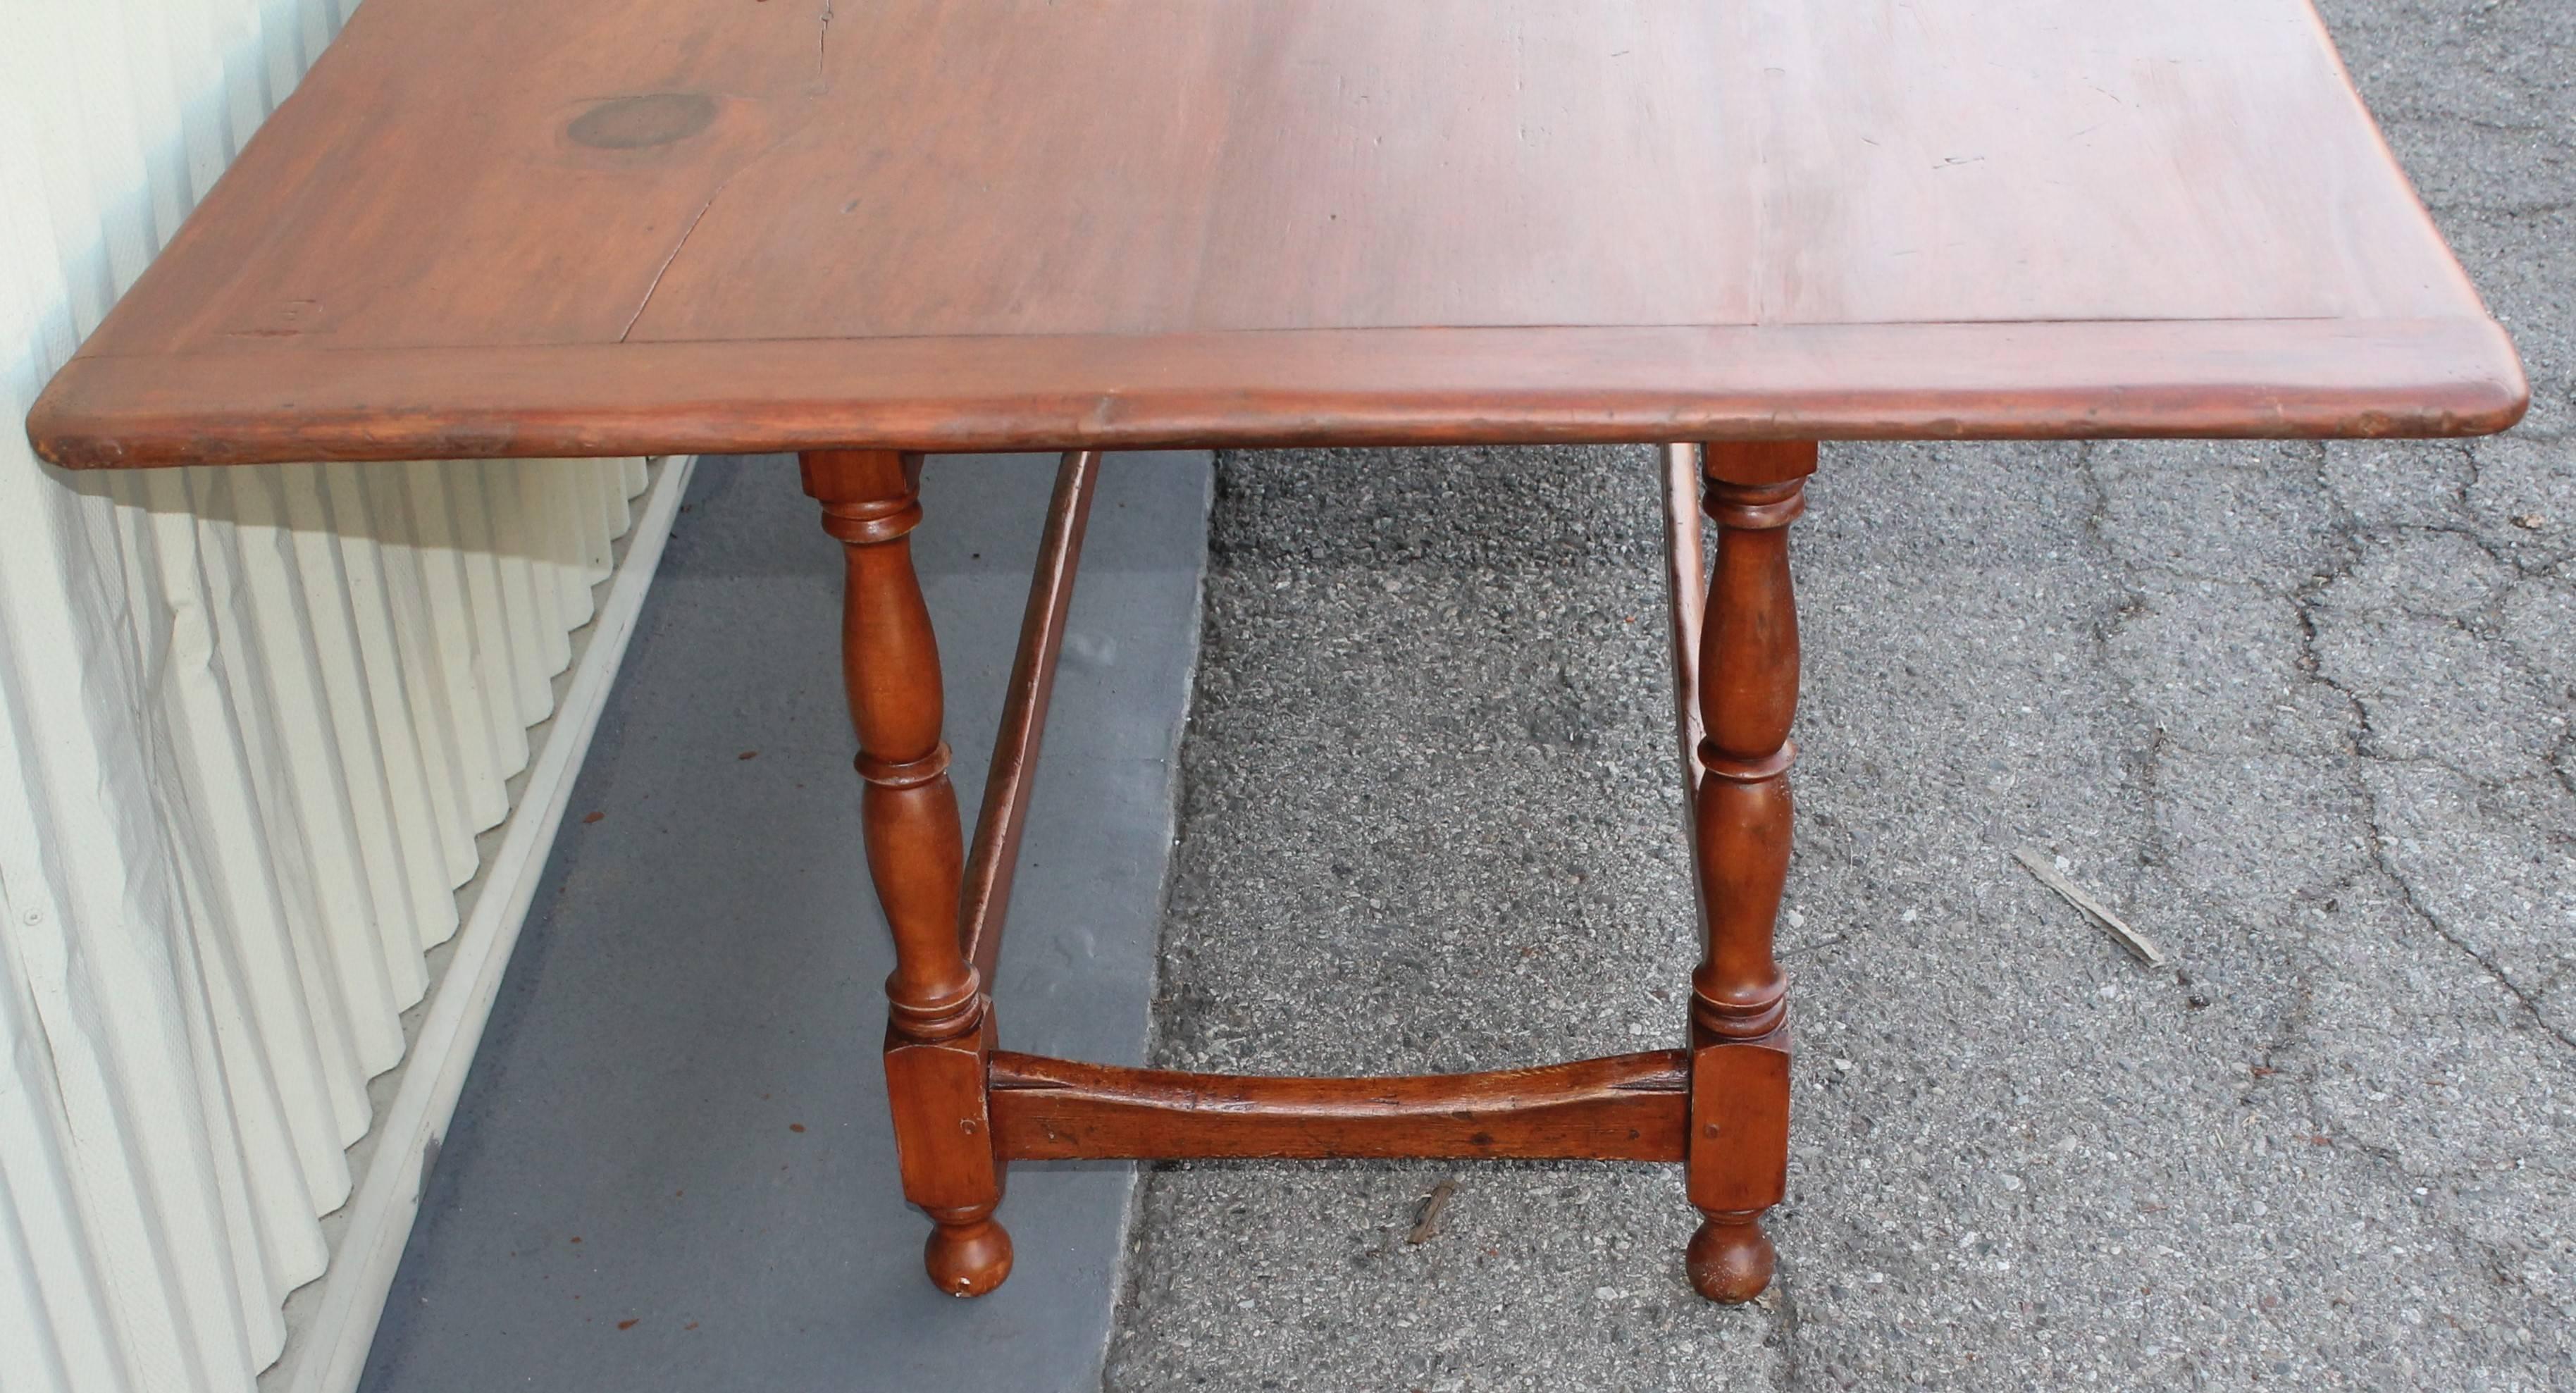 Patinated Monumental 19th Century Harvest Table from New England